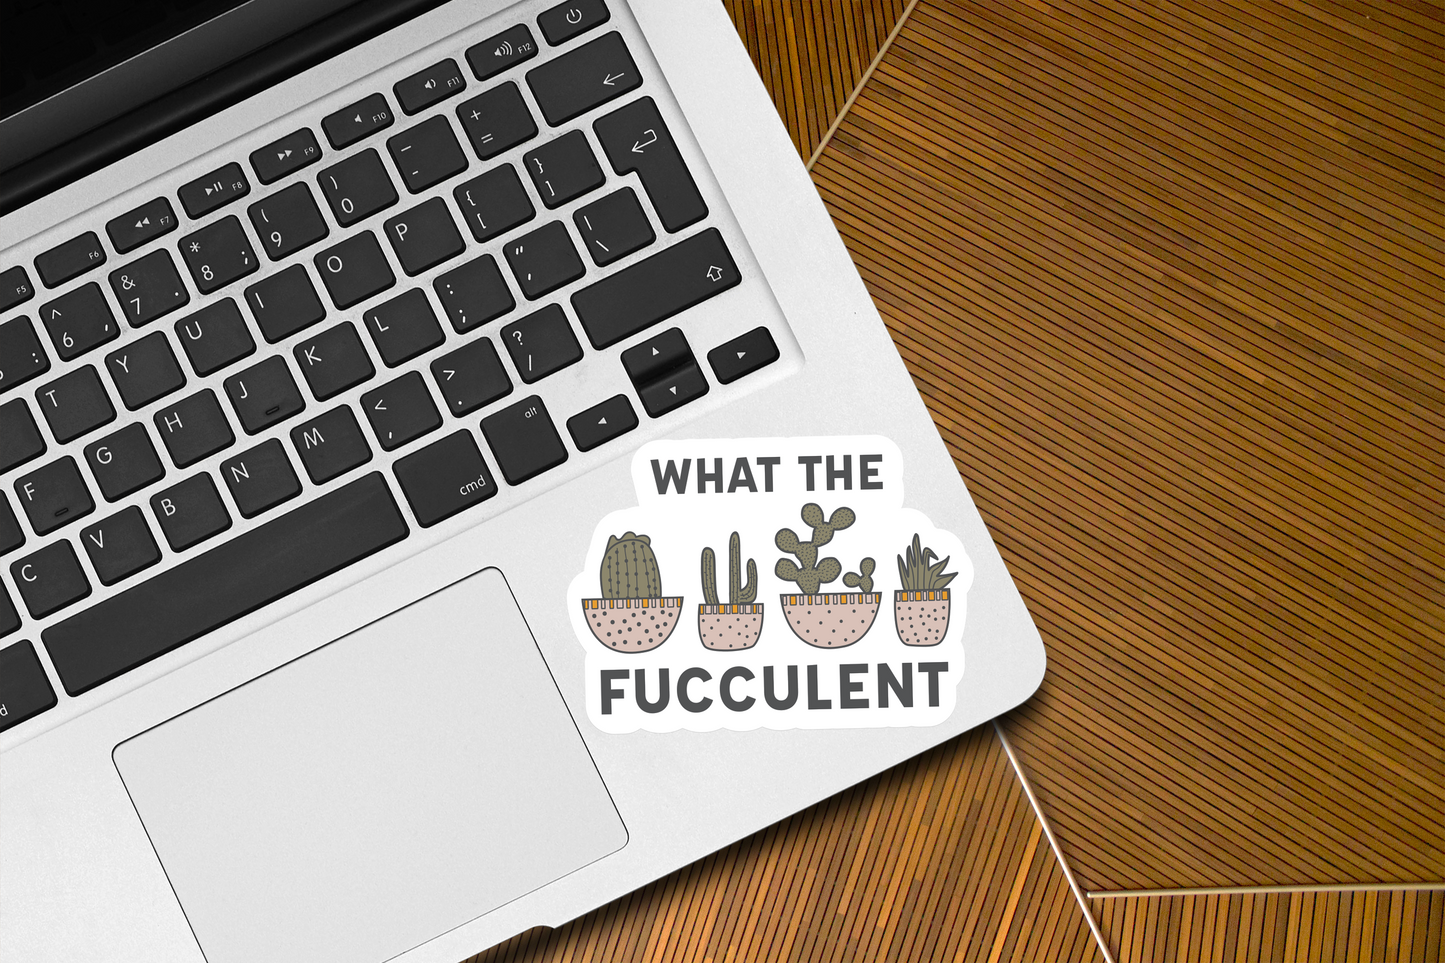 Are you looking for a fun and quirky way to add a touch of humor to your belongings? Look no further than our "What the Fucculent" Cactus Vinyl Sticker! This sassy sticker is perfect for adding a playful twist to your laptop, water bottle, notebook, or any surface that needs a dose of personality.